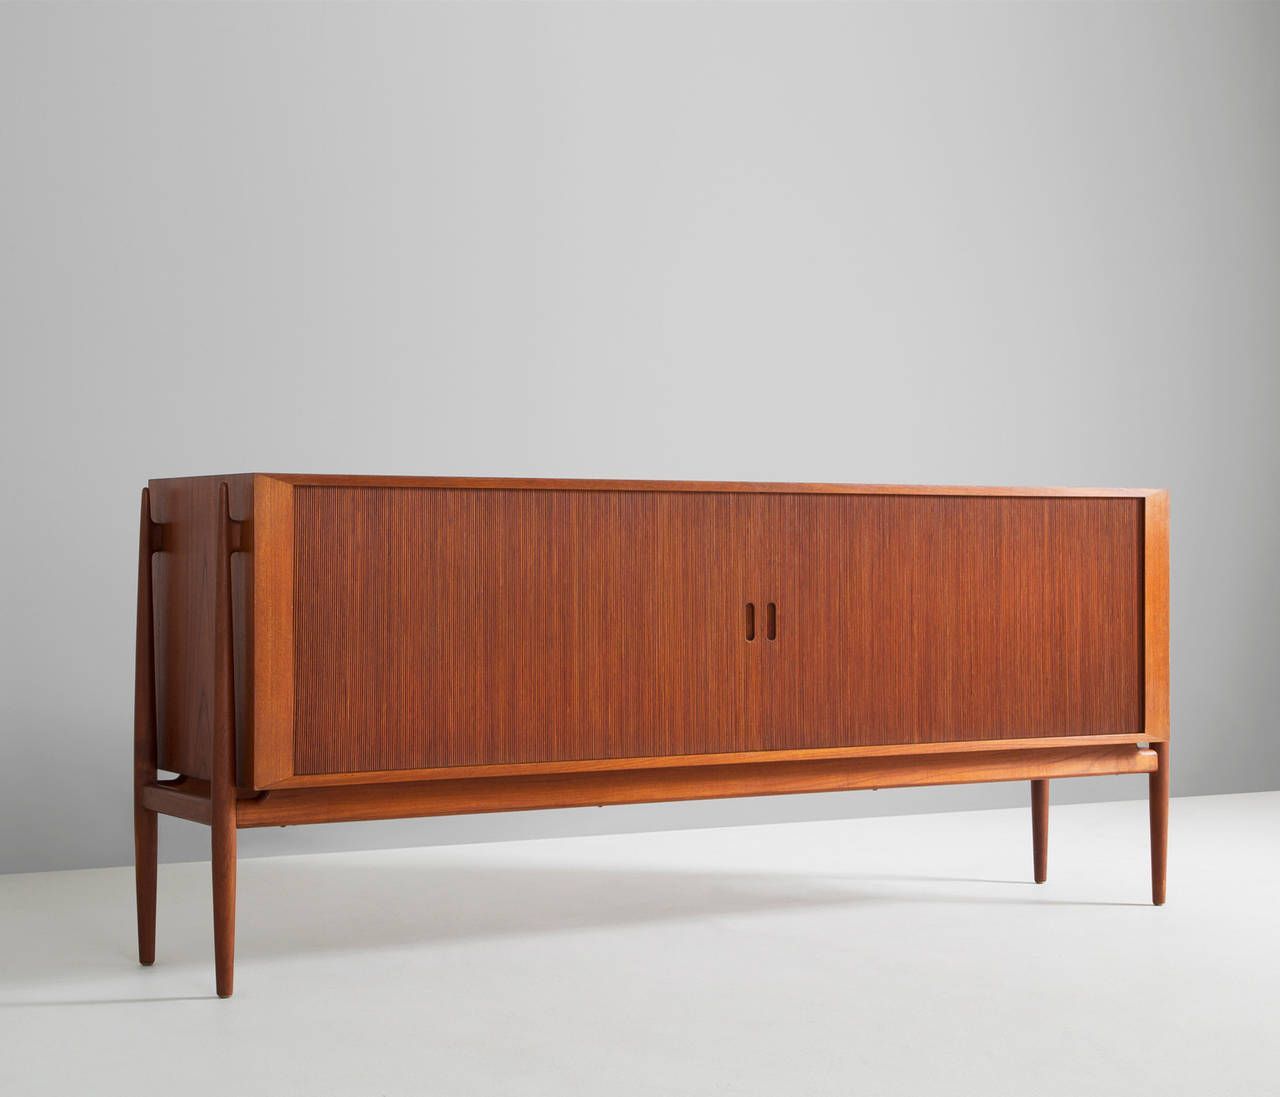 Pinandrewang On Cabinetmarker | Modern Furniture For Womack Sideboards (View 15 of 30)